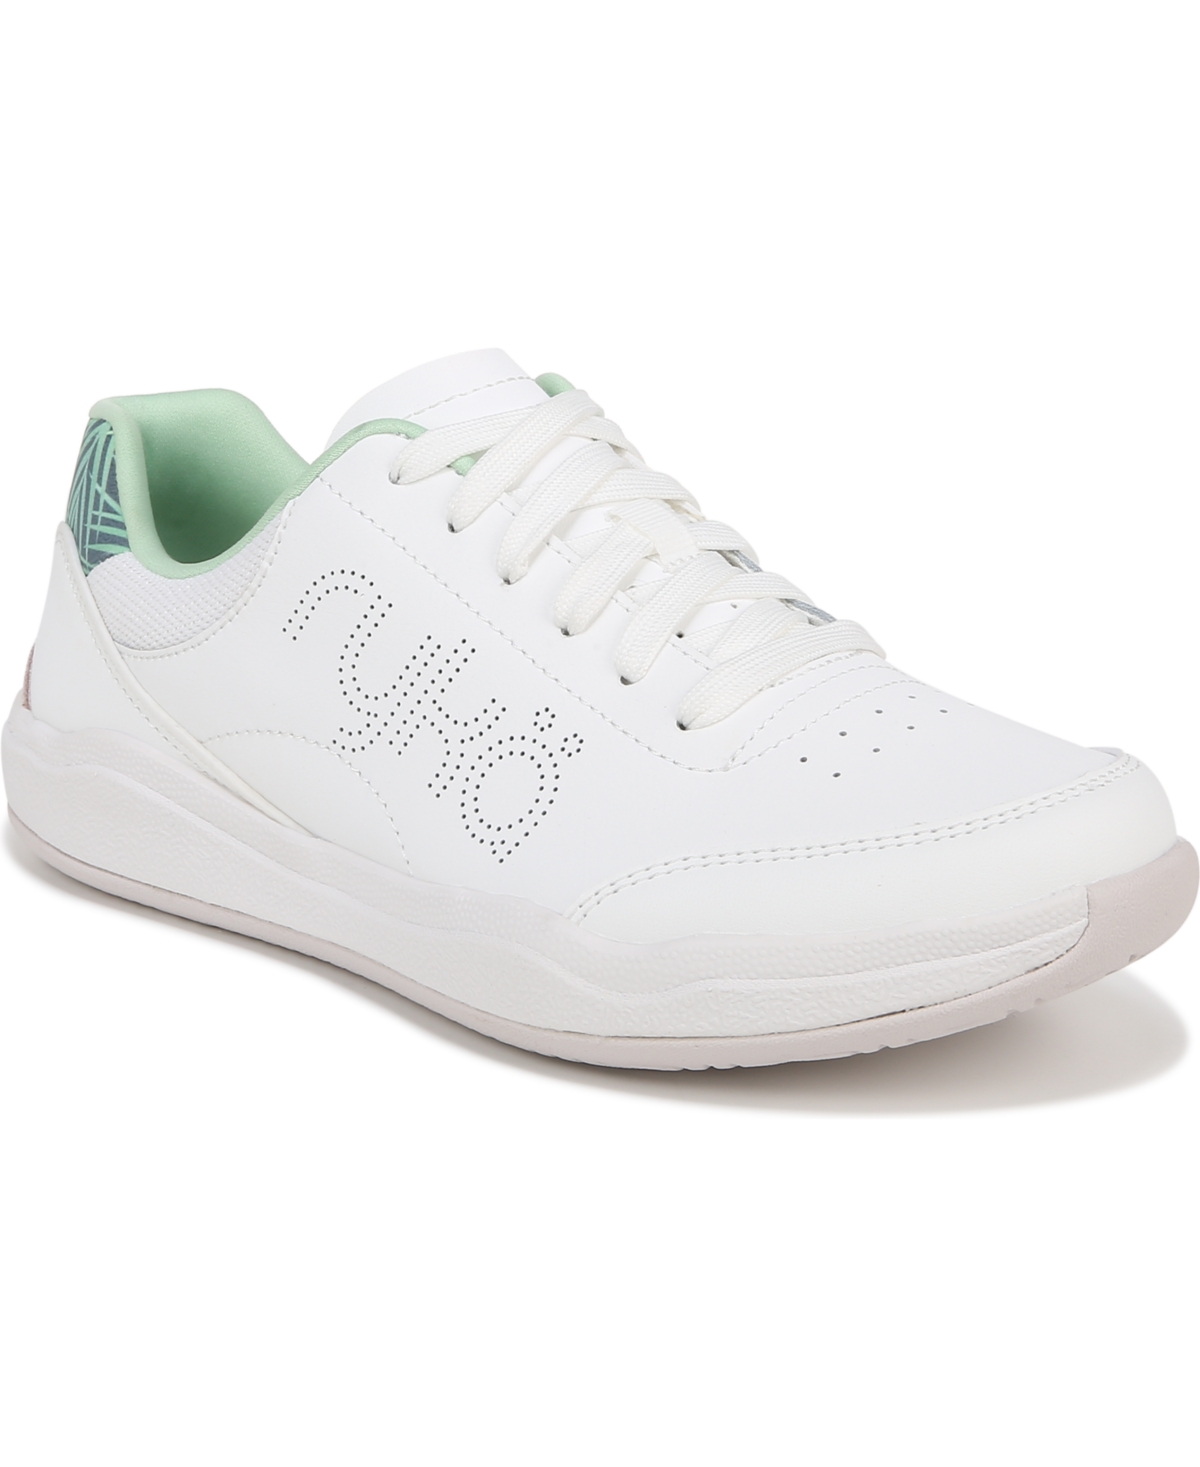 Women's Courtside Pickleball Sneakers - White/Green Leather